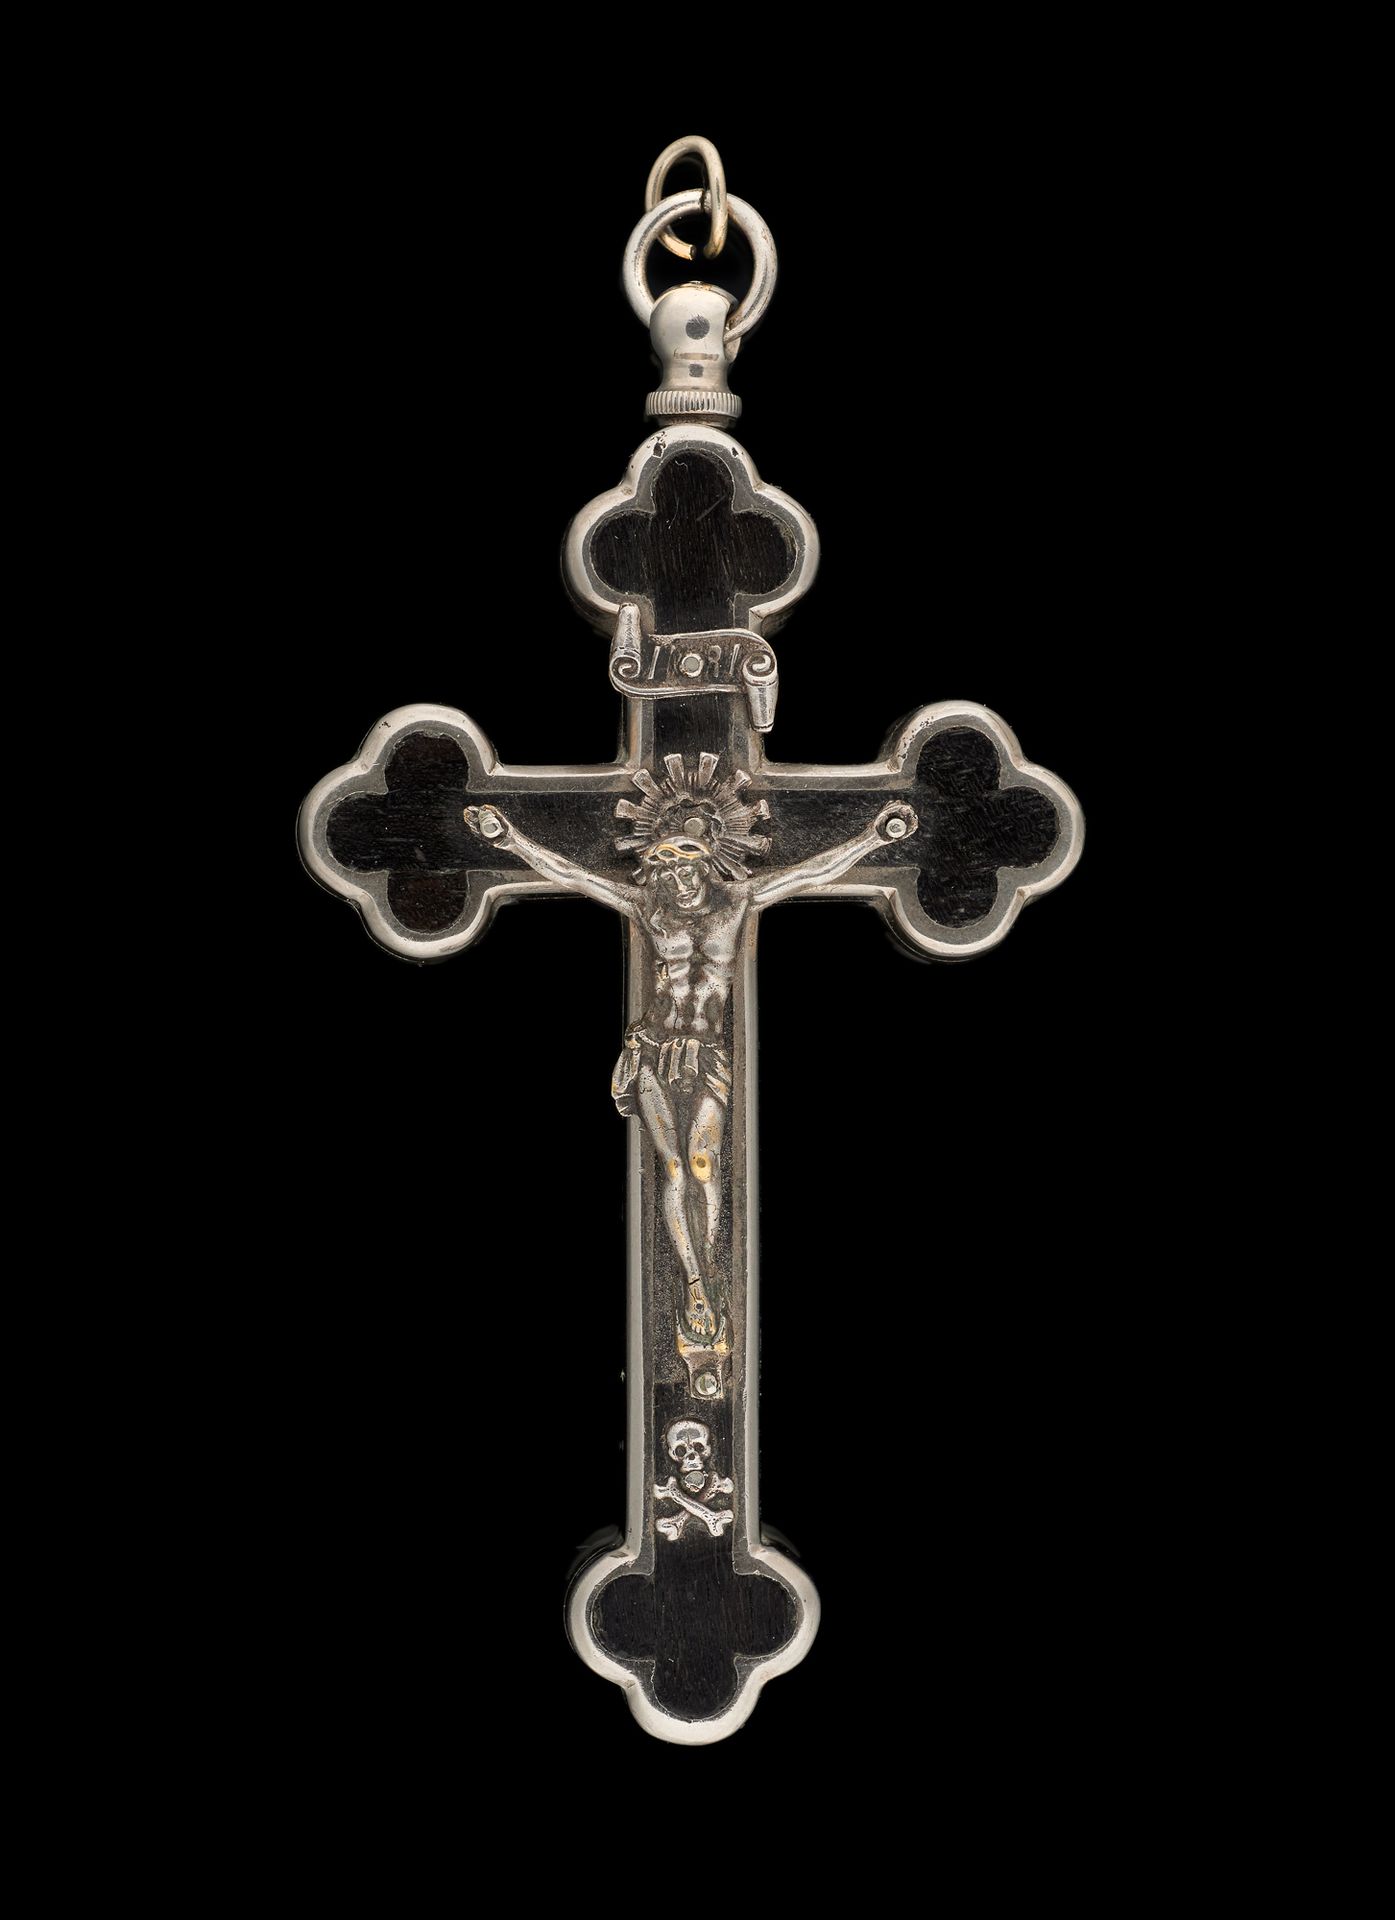 Joaillerie. Jewel: Reliquary cross in silver and wood, a system allows to open i&hellip;